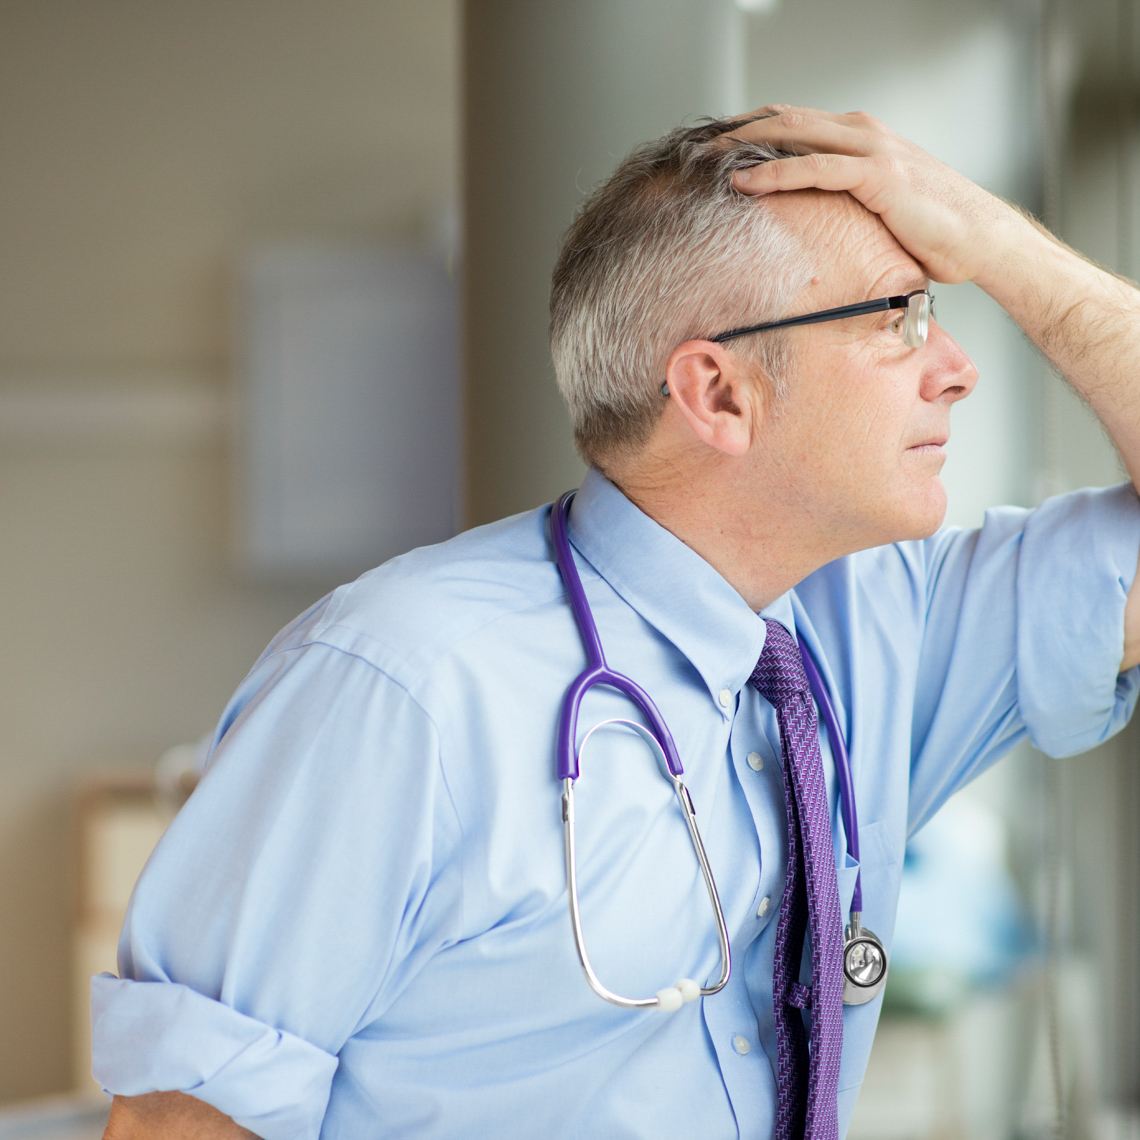 doctor looking out window with hand on his head